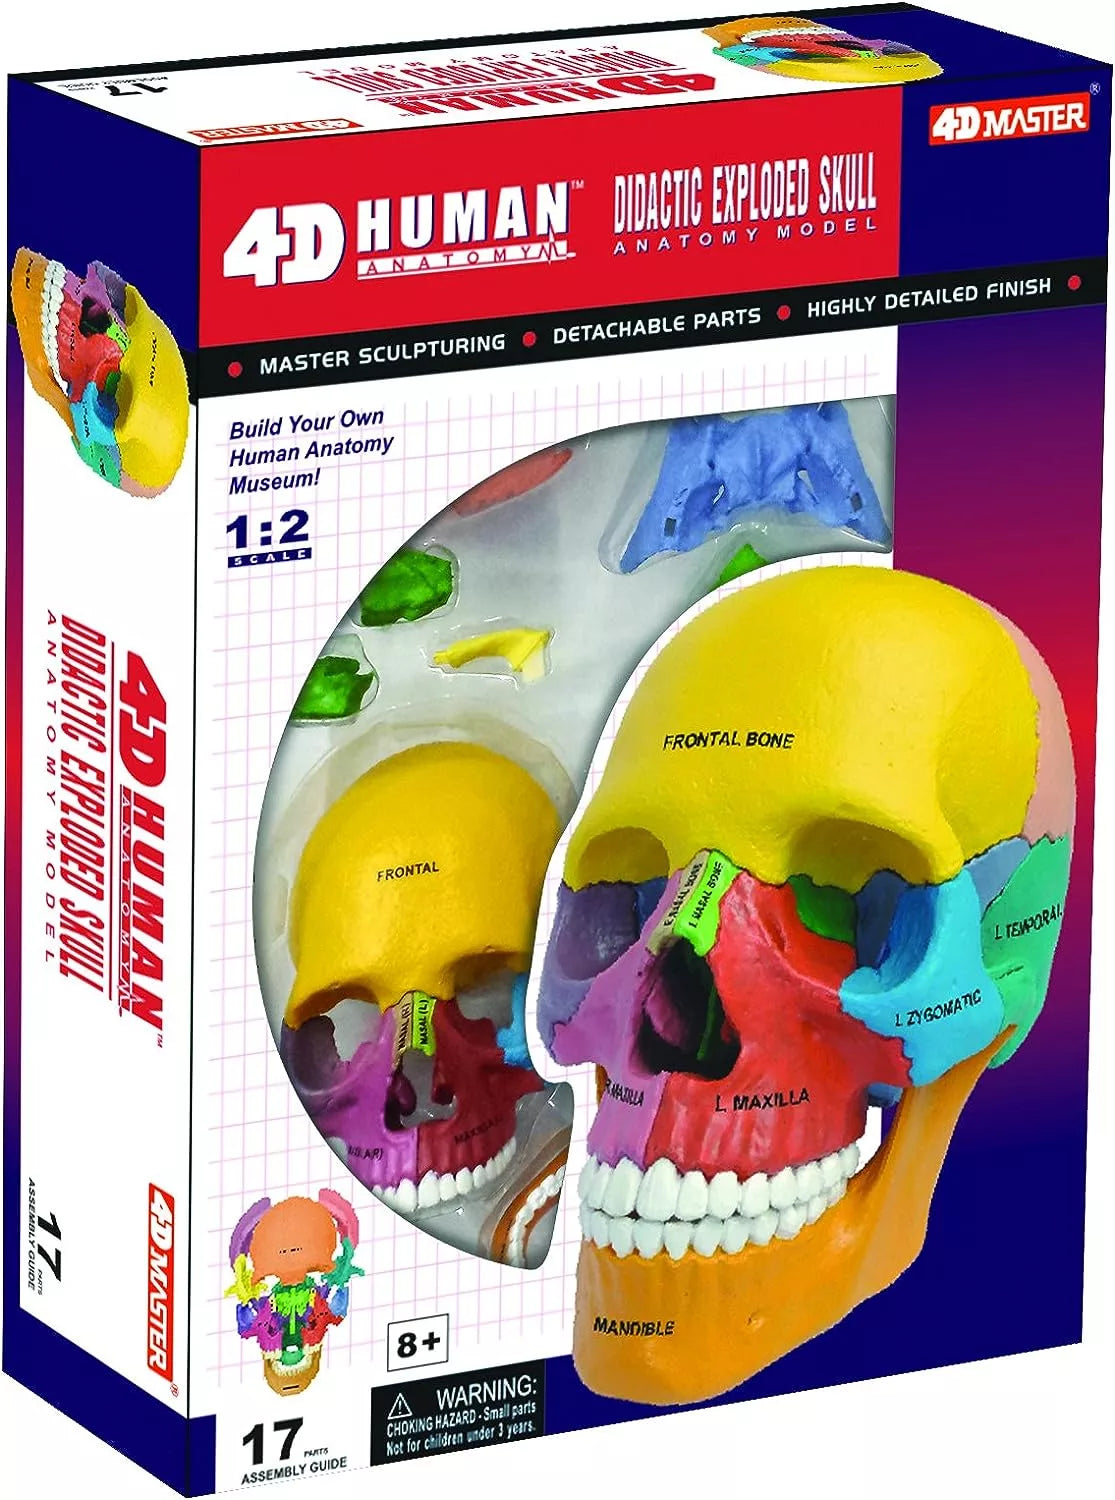 4D Didactic Exploded Skull Model